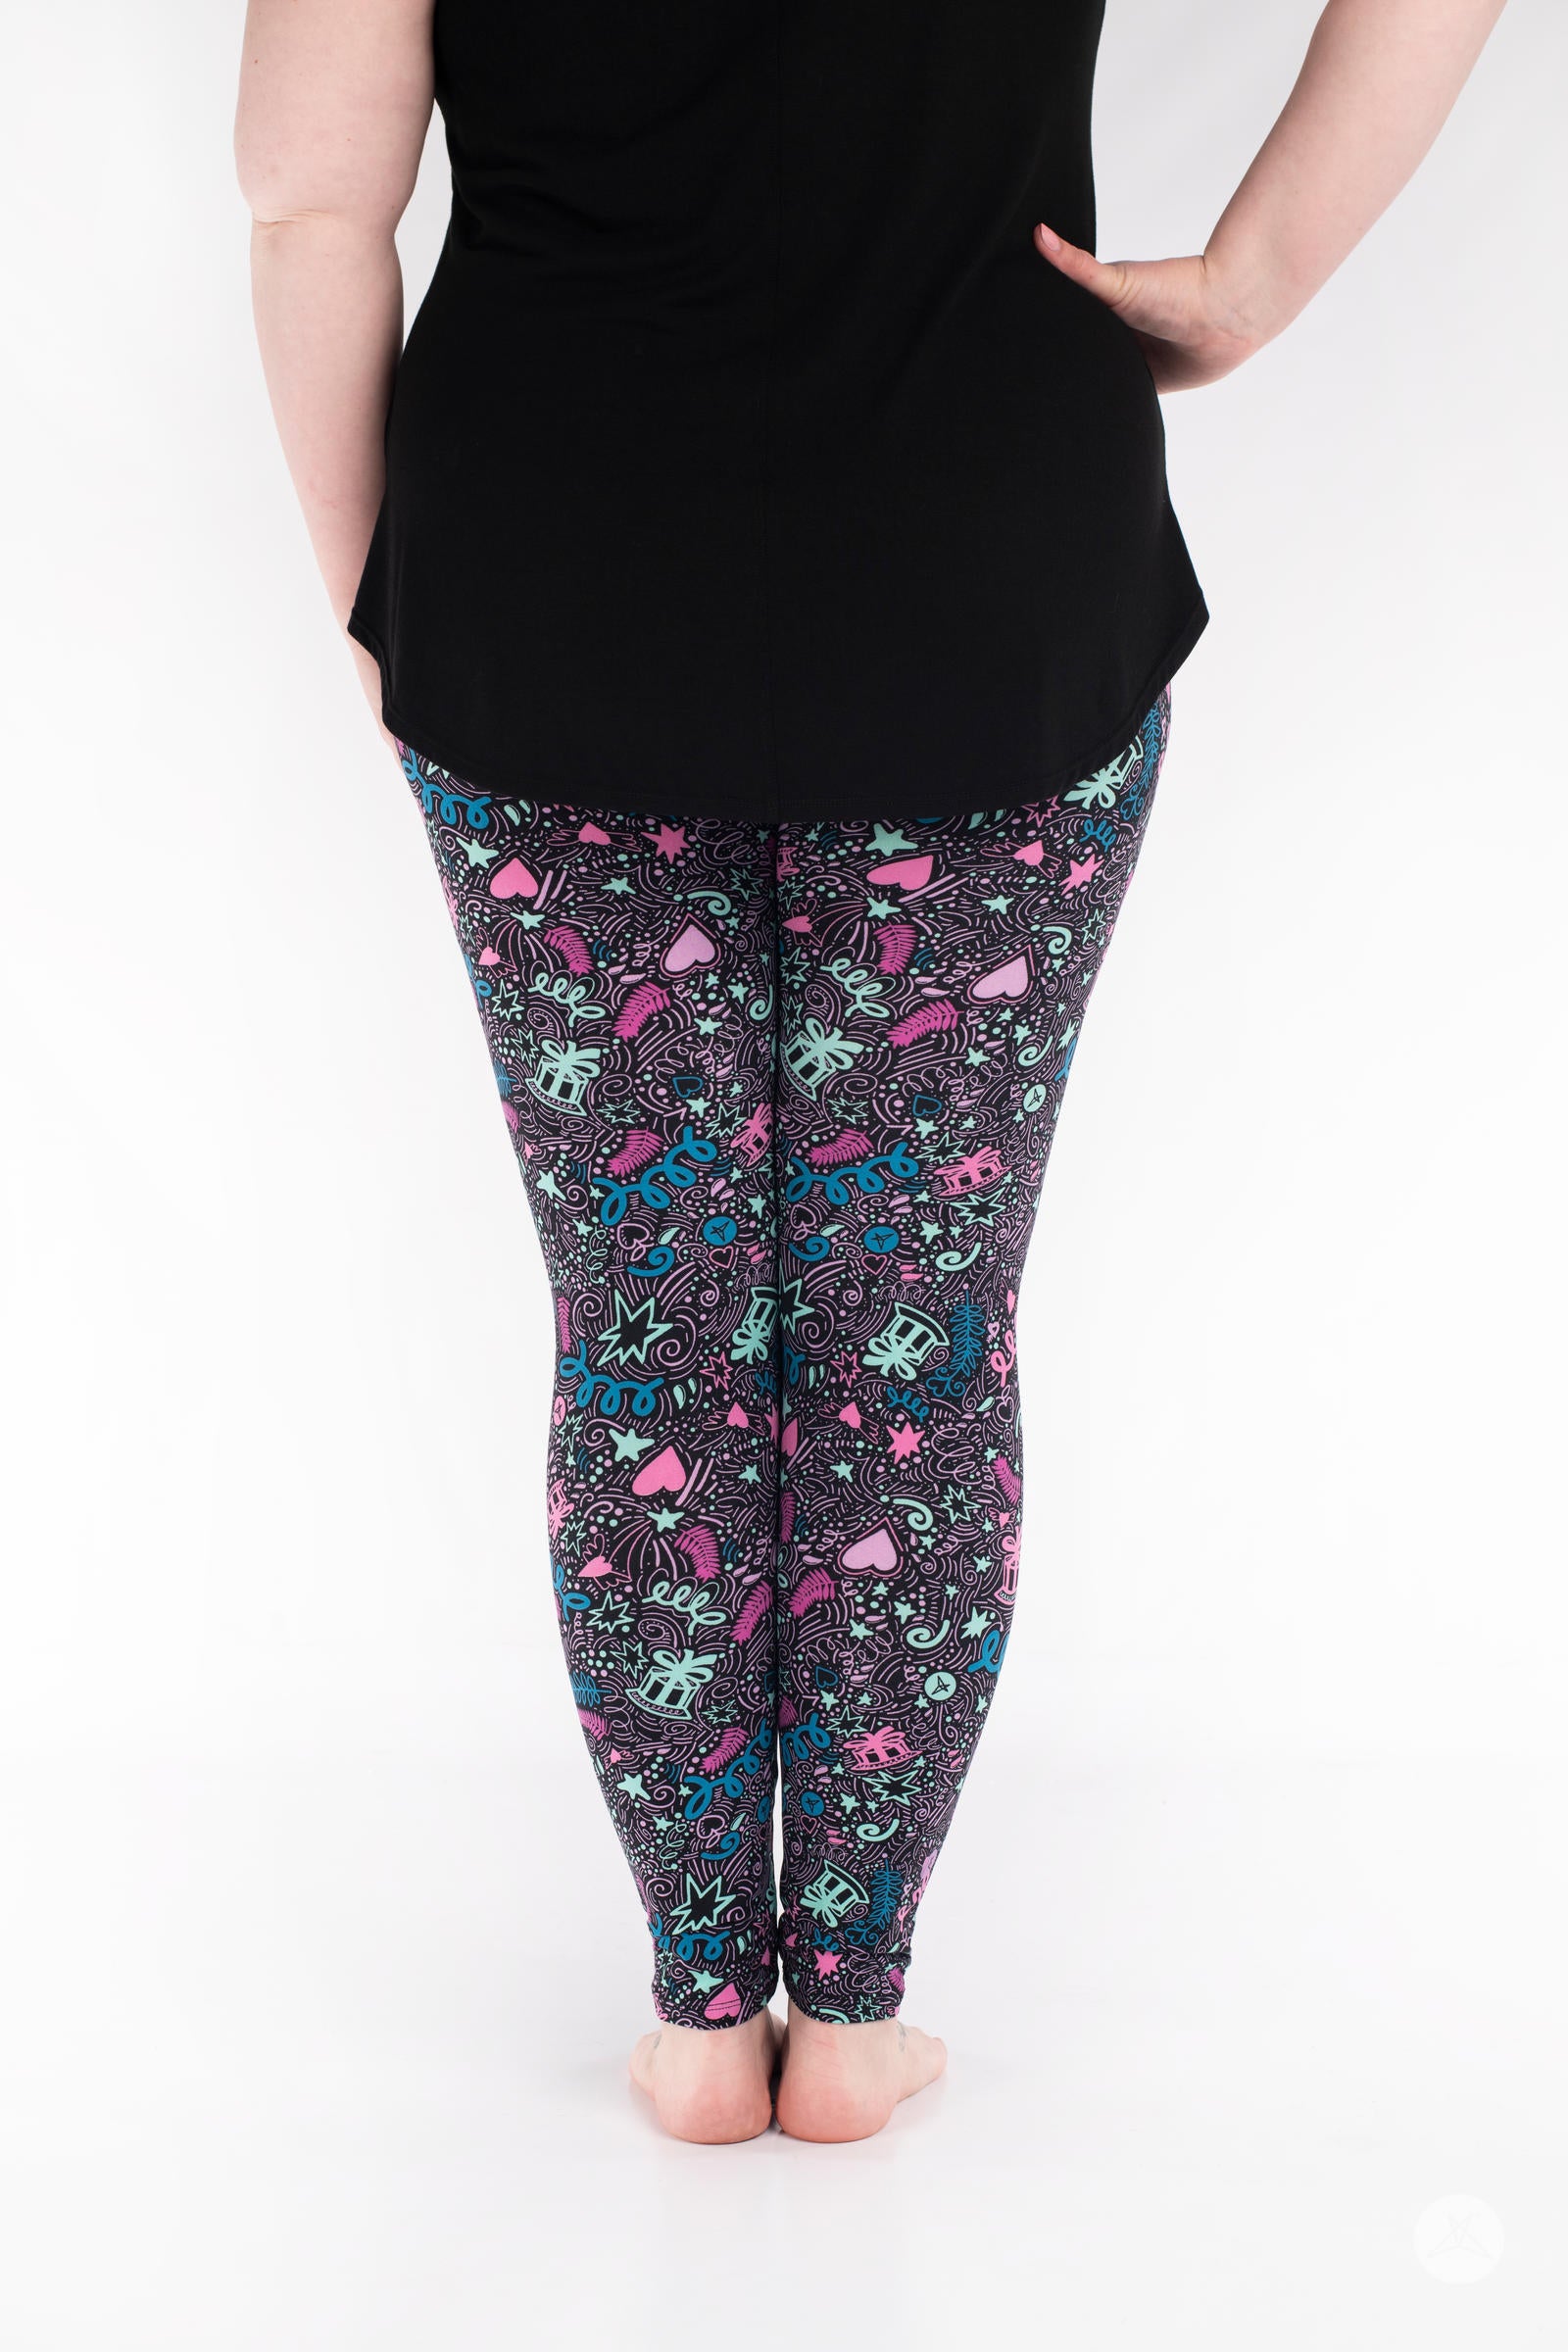 Buttery Smooth Monochrome Floral Paisley Extra Plus Size Leggings - 3X-5X